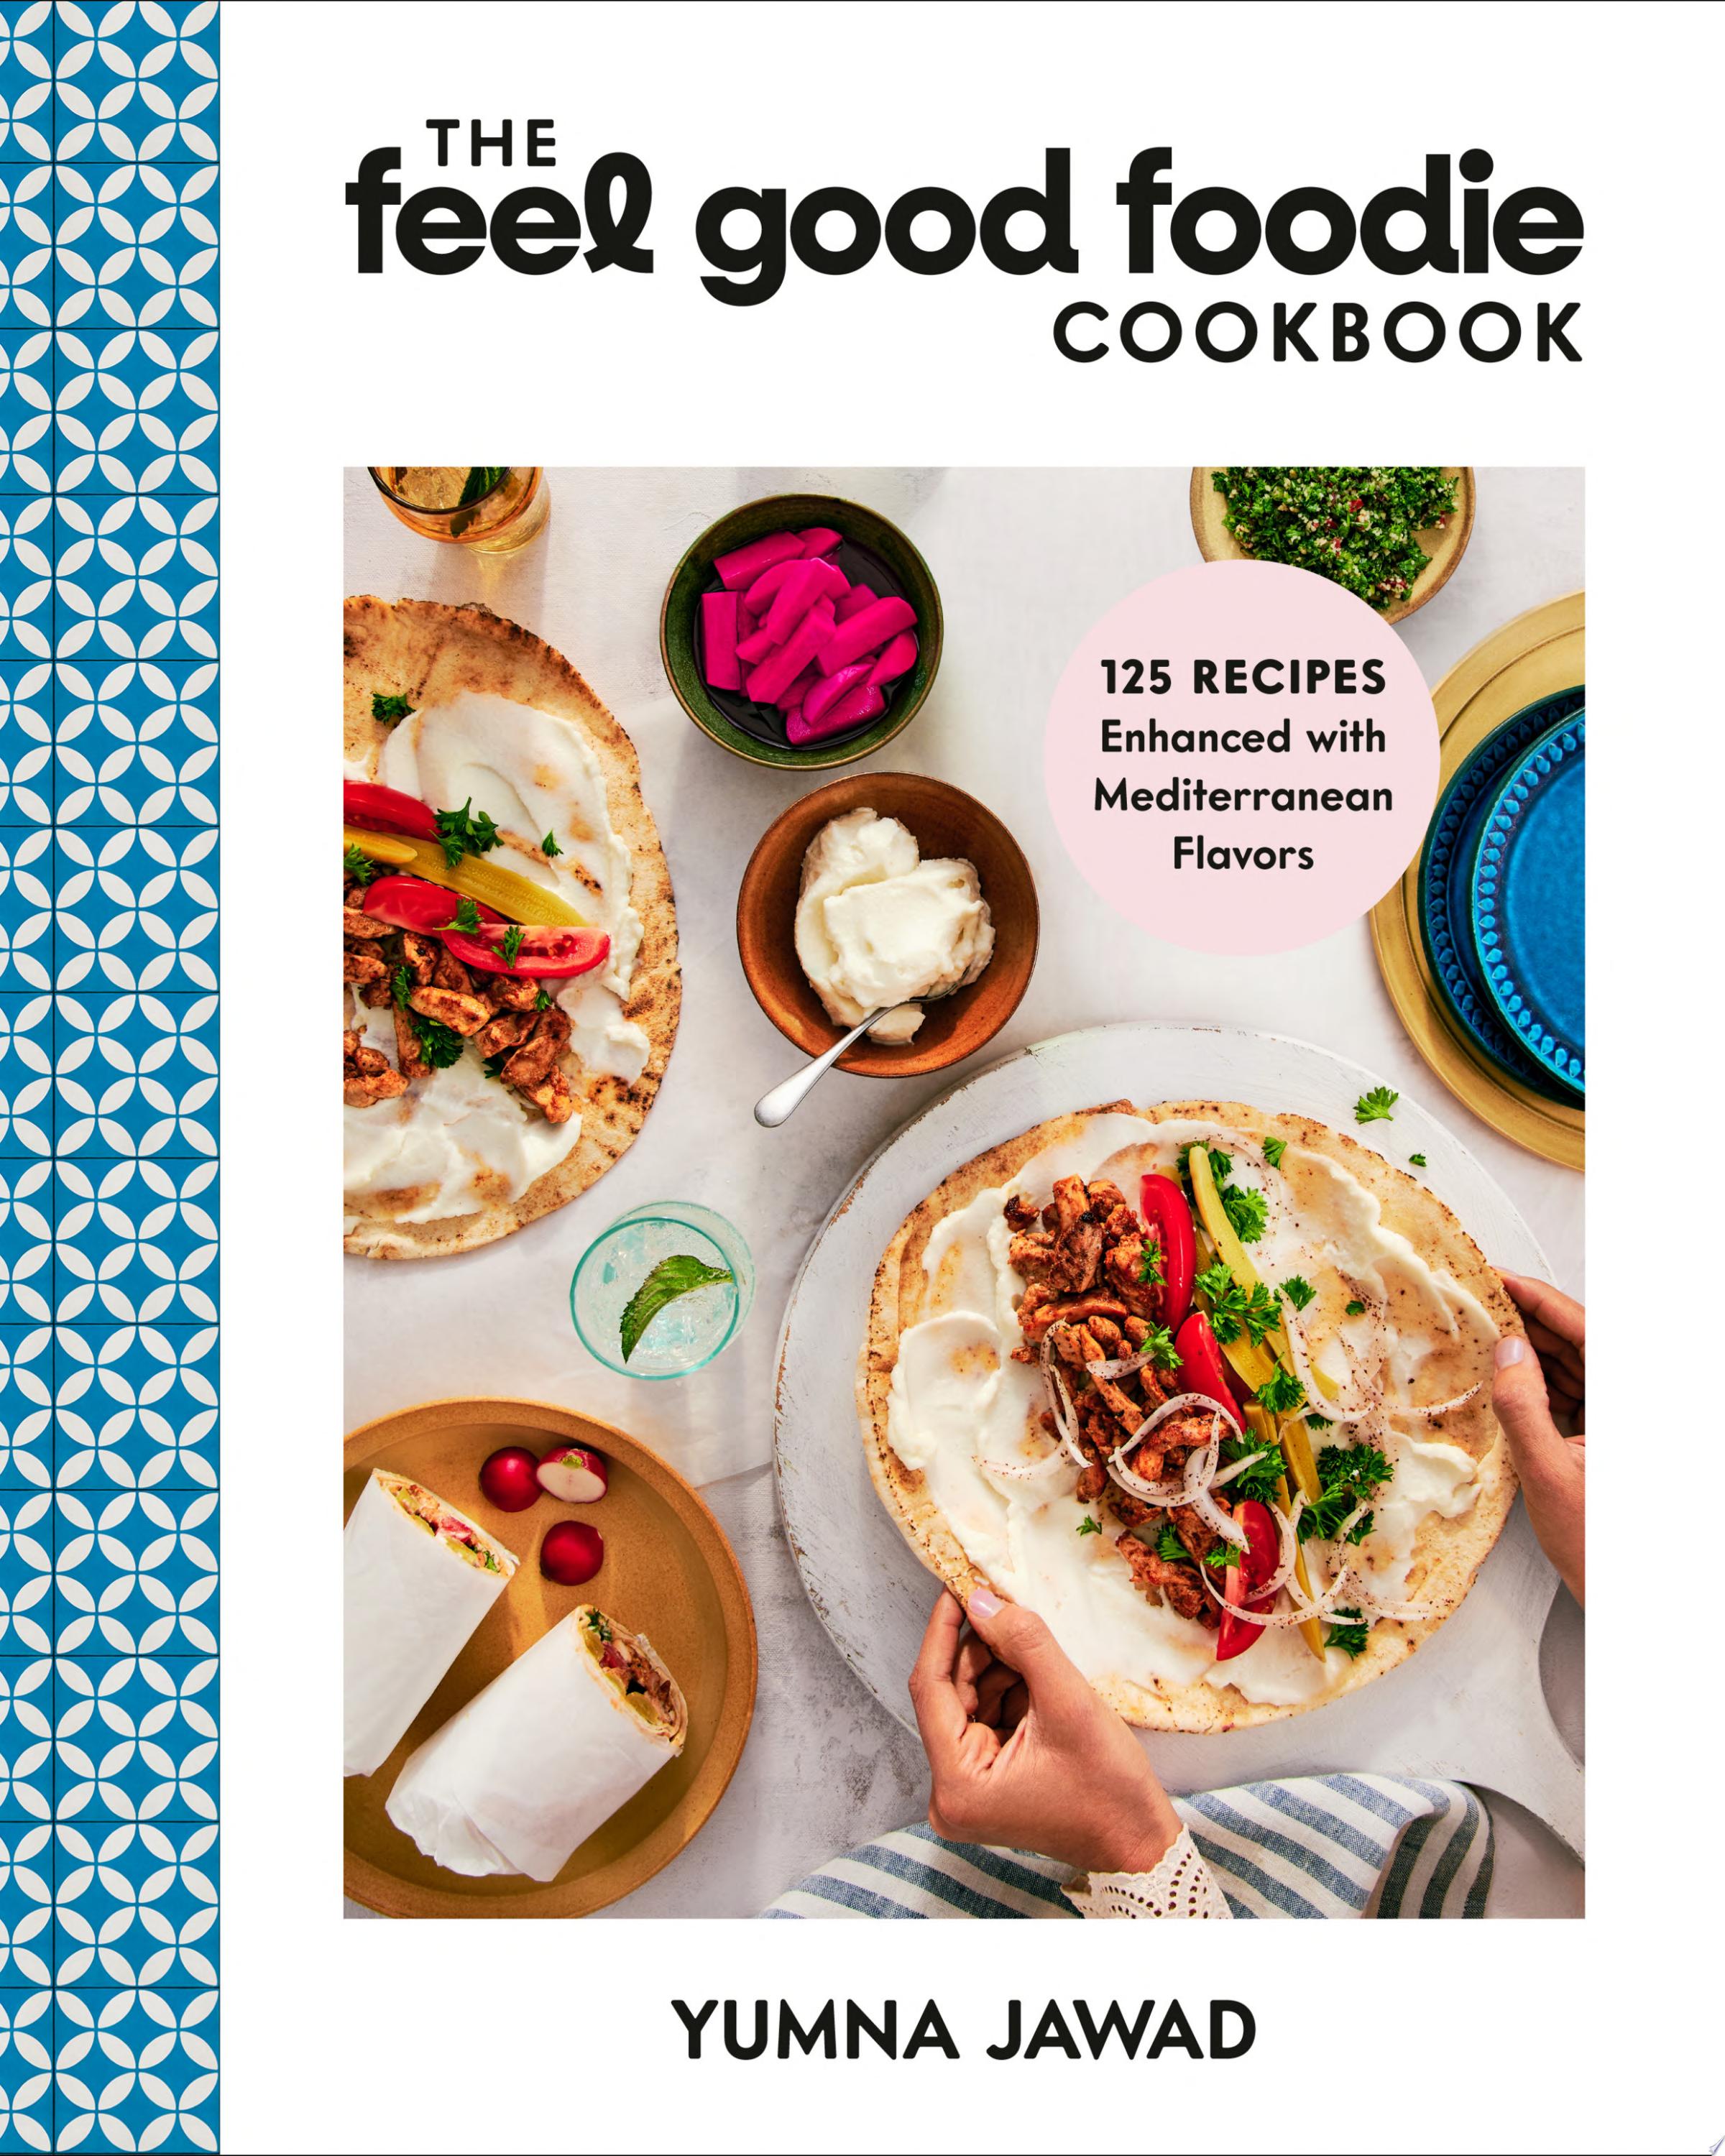 Image for "The Feel Good Foodie Cookbook"